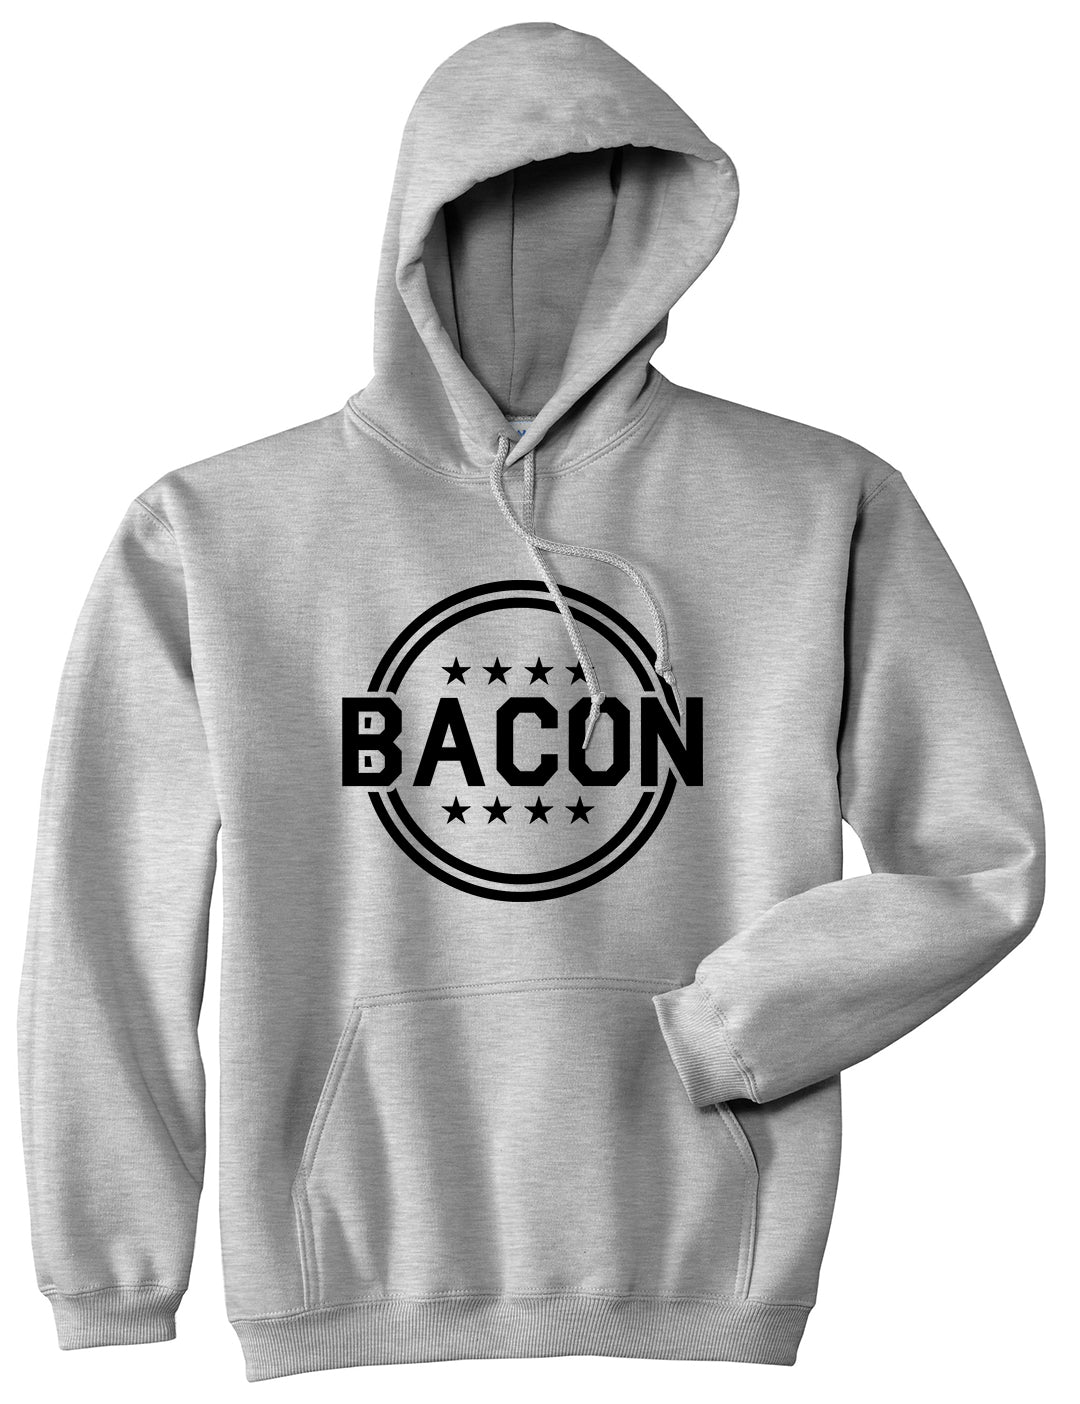 Bacon Stars Grey Pullover Hoodie by Kings Of NY